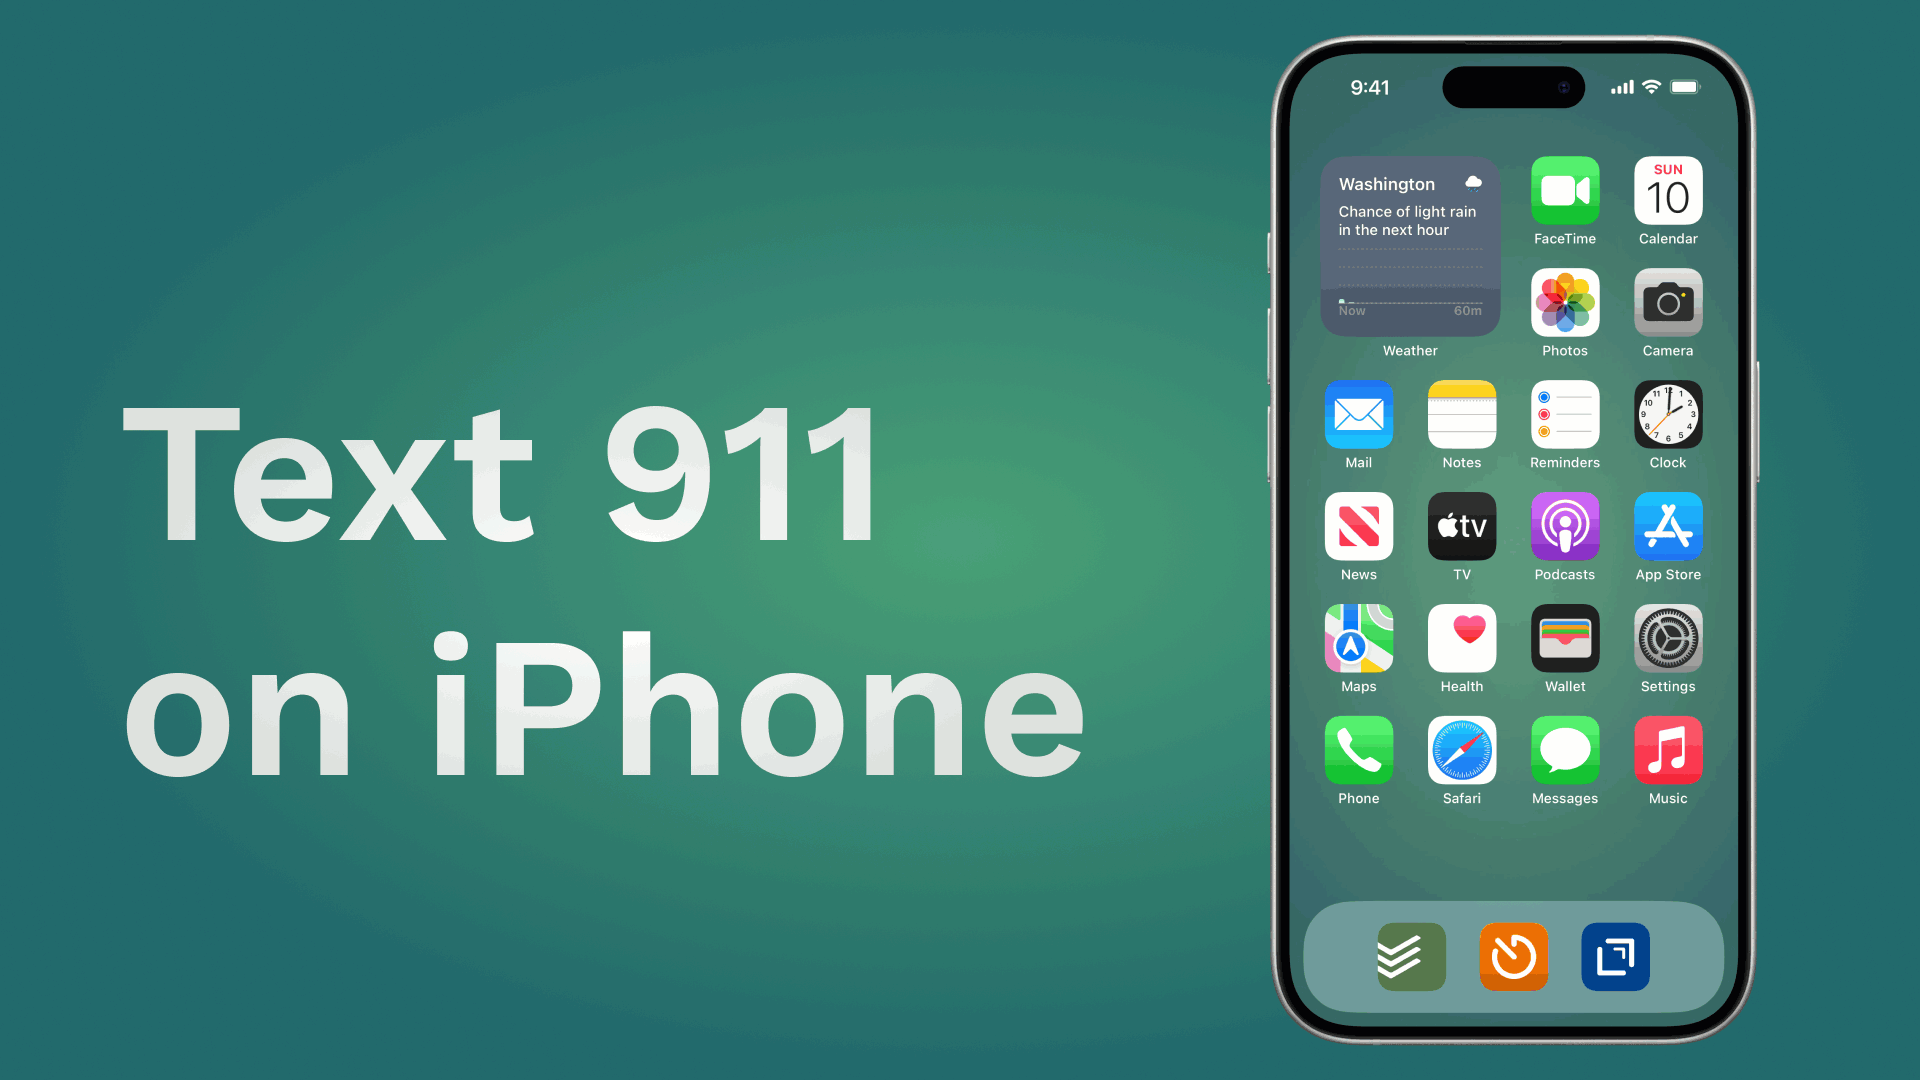 iPhone screen displaying 'Text 911' button, enabling users to send emergency messages via text.